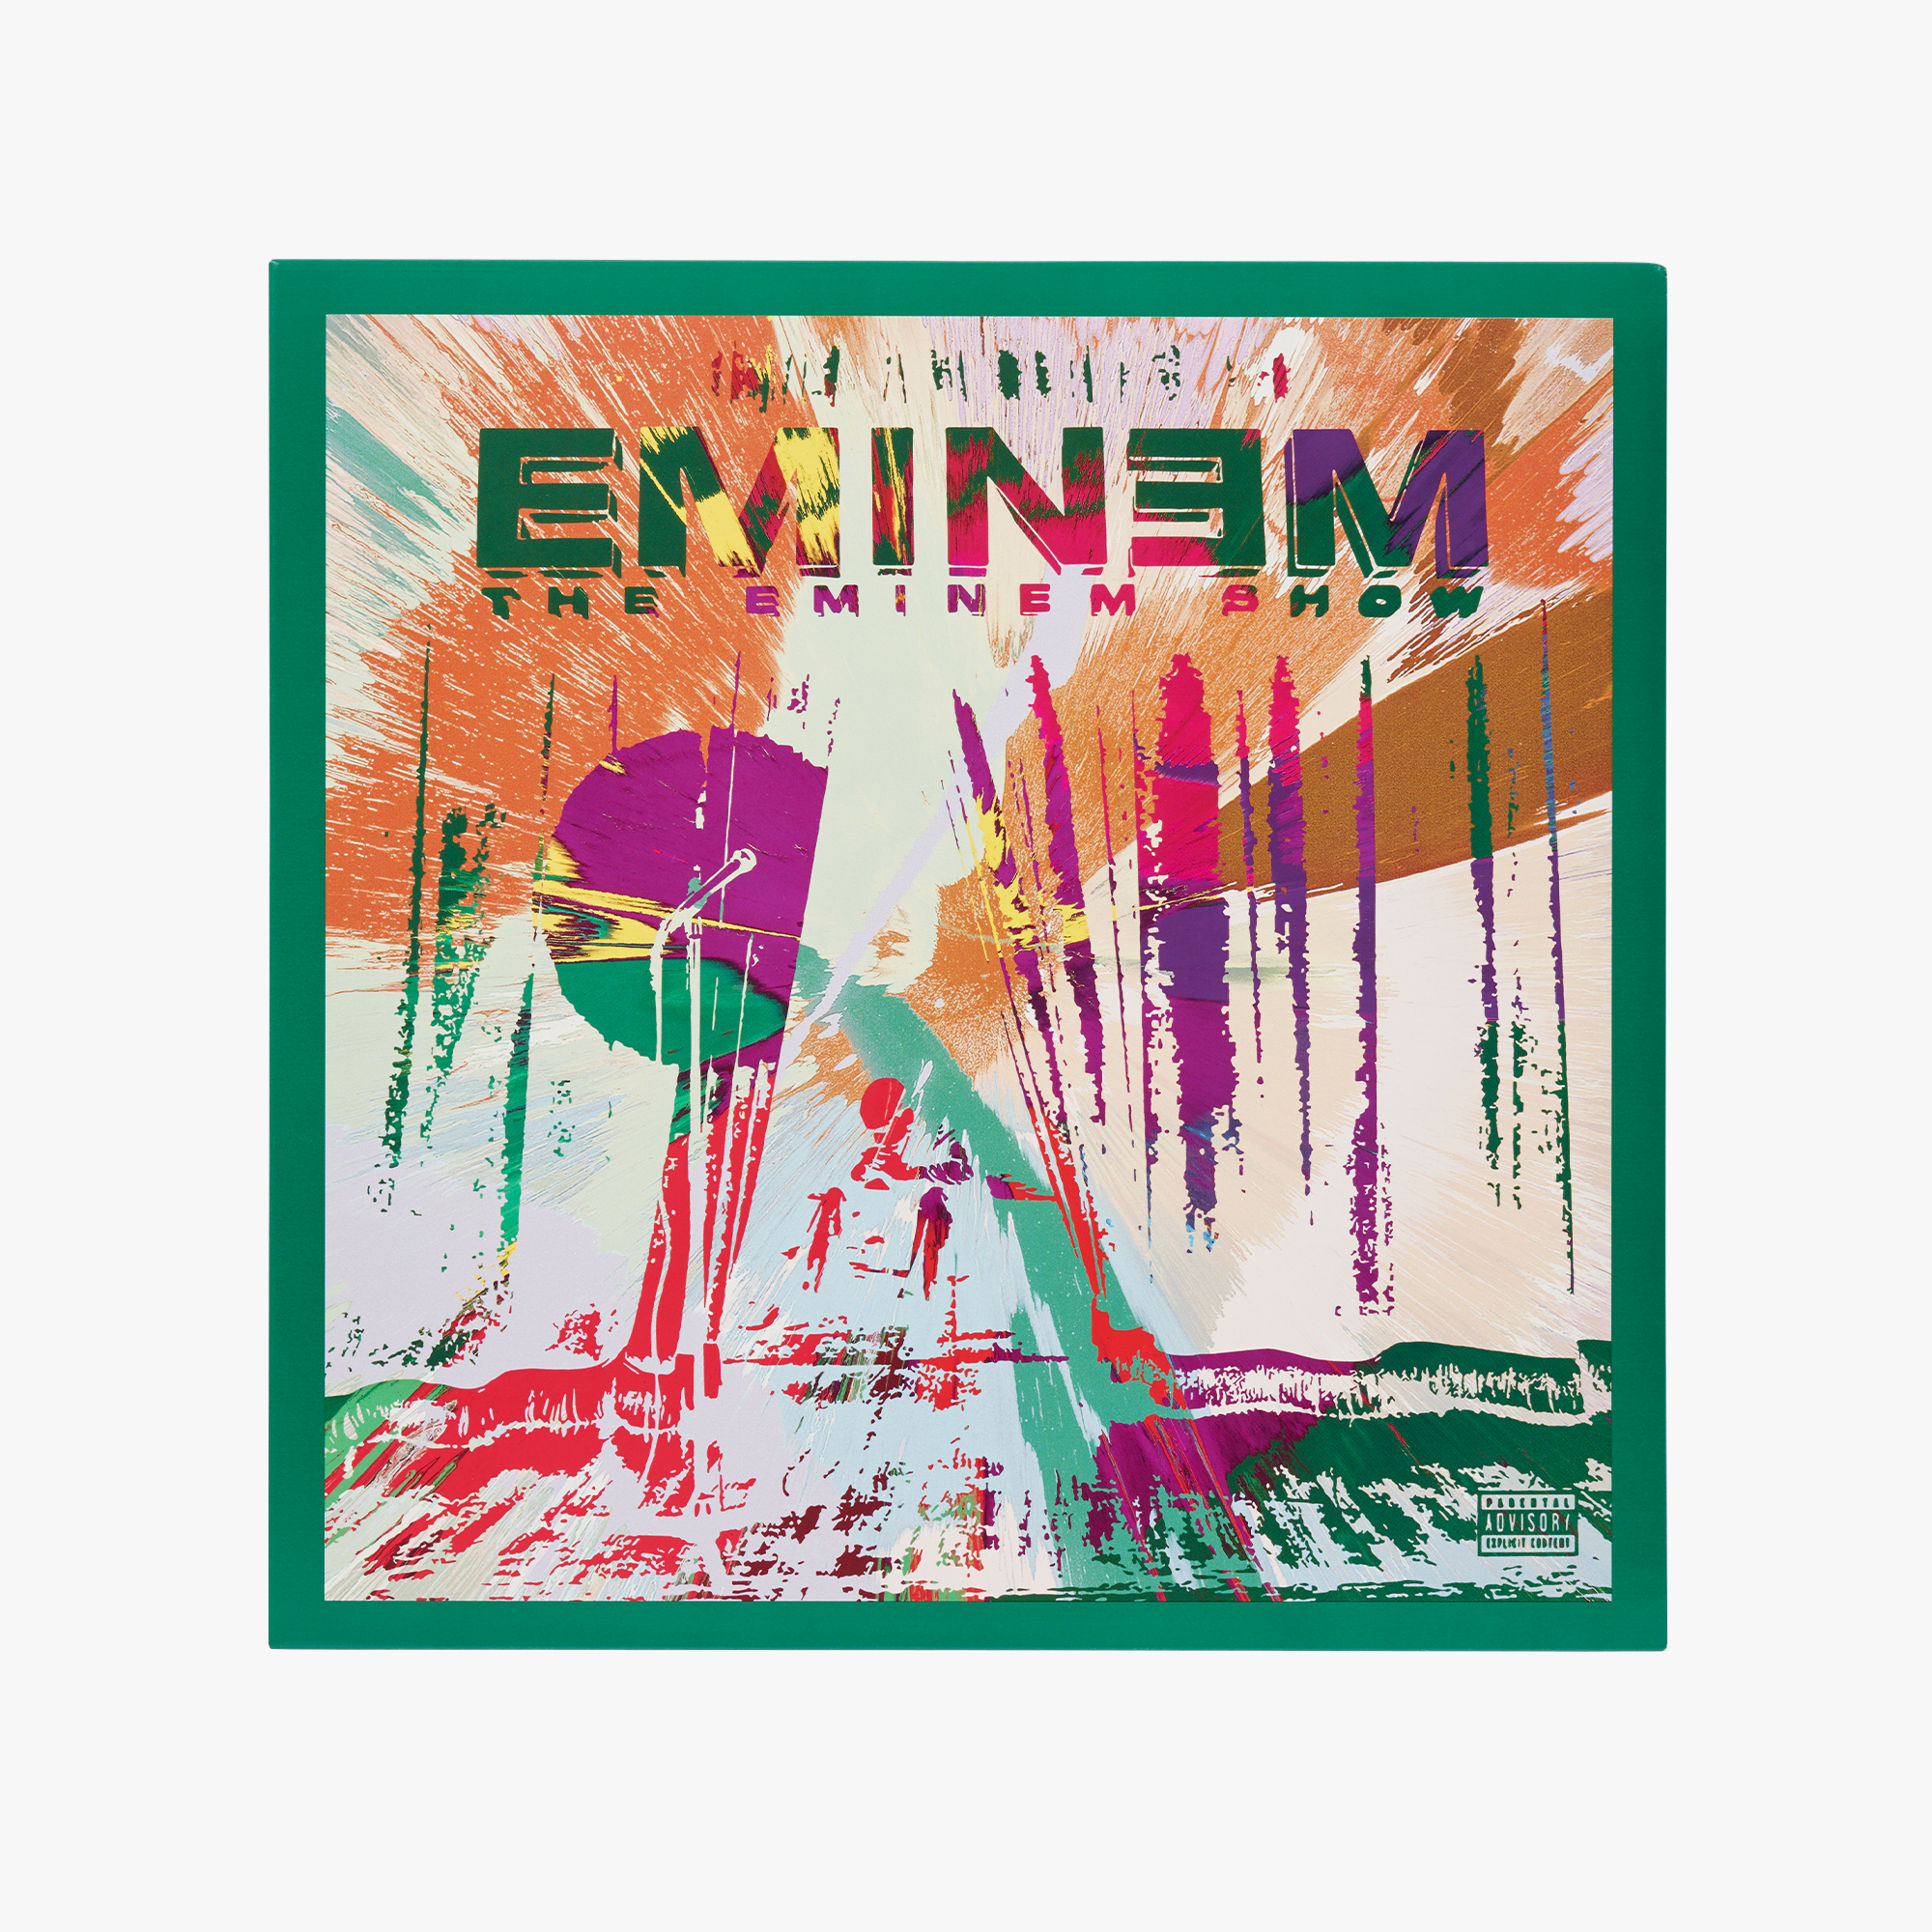 Alternate View 2 of Eminem - The Eminem Show by Damien Hirst Gallery Picture Disc